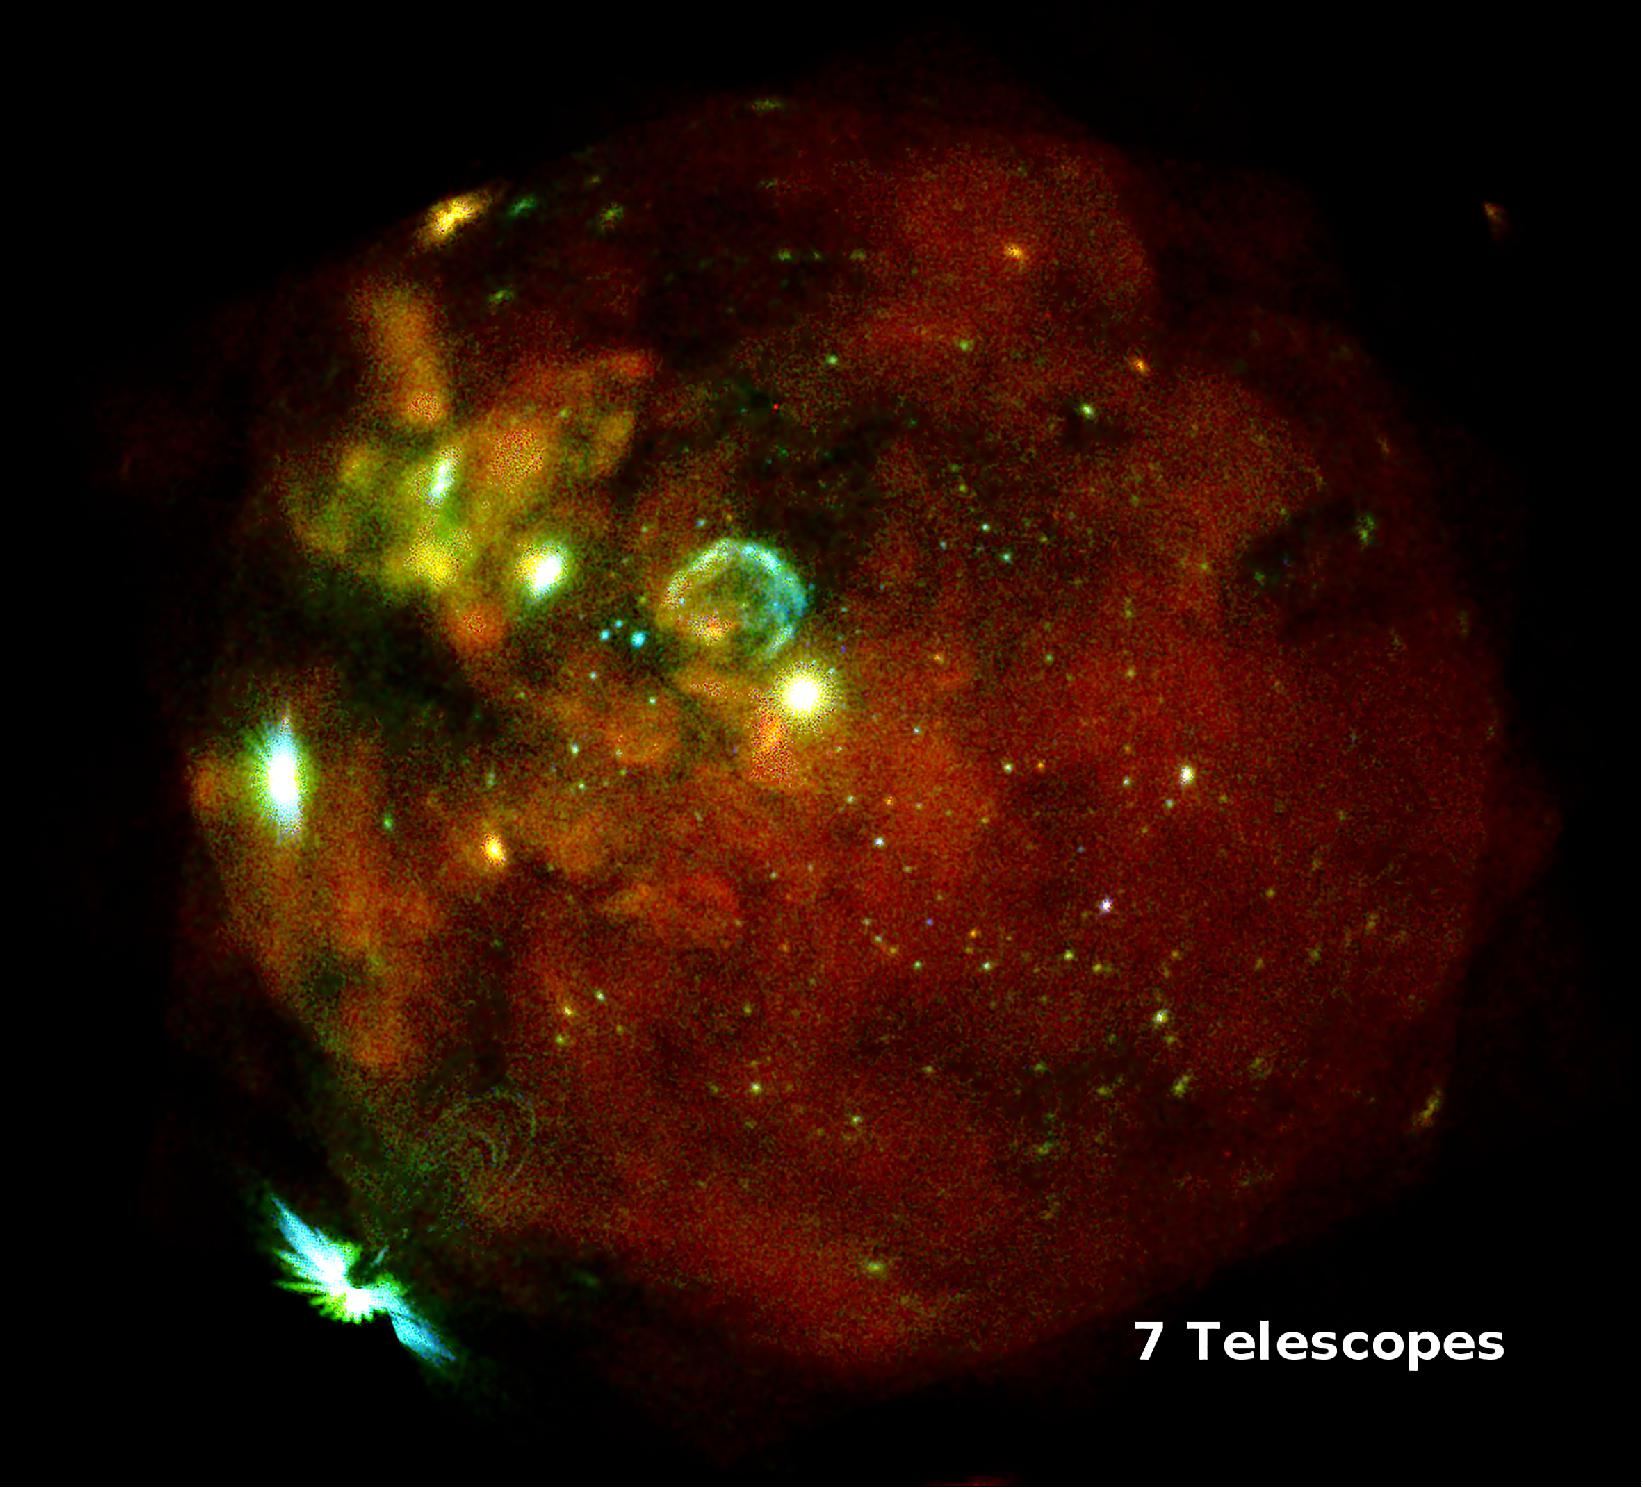 Figure 28: This image shows our neighboring galaxy, the LMC (Large Magellanic Cloud), observed in series of exposures with all seven eROSITA telescope modules taken from 18 to 19 October 2019. The diffuse emission originates from the hot gas between the stars with temperatures typically a few million degrees. The more compact nebulous structures in the image are mainly supernova remnants, i.e. stellar atmospheres expelled in huge explosions at the end of a massive star’s lifetime. The most prominent one, SN1987A, is seen as the bright source close to the center. A host of other sources in the LMC itself include accreting binary stars or stellar clusters with very massive young stars (up to 100 solar masses and more). There are also a number of point sources, either foreground stars from our home Galaxy or distant Active Galactic Nuclei (image credit: MPE/IKI, F. Haberl, M. Freyberg and C. Maitra)